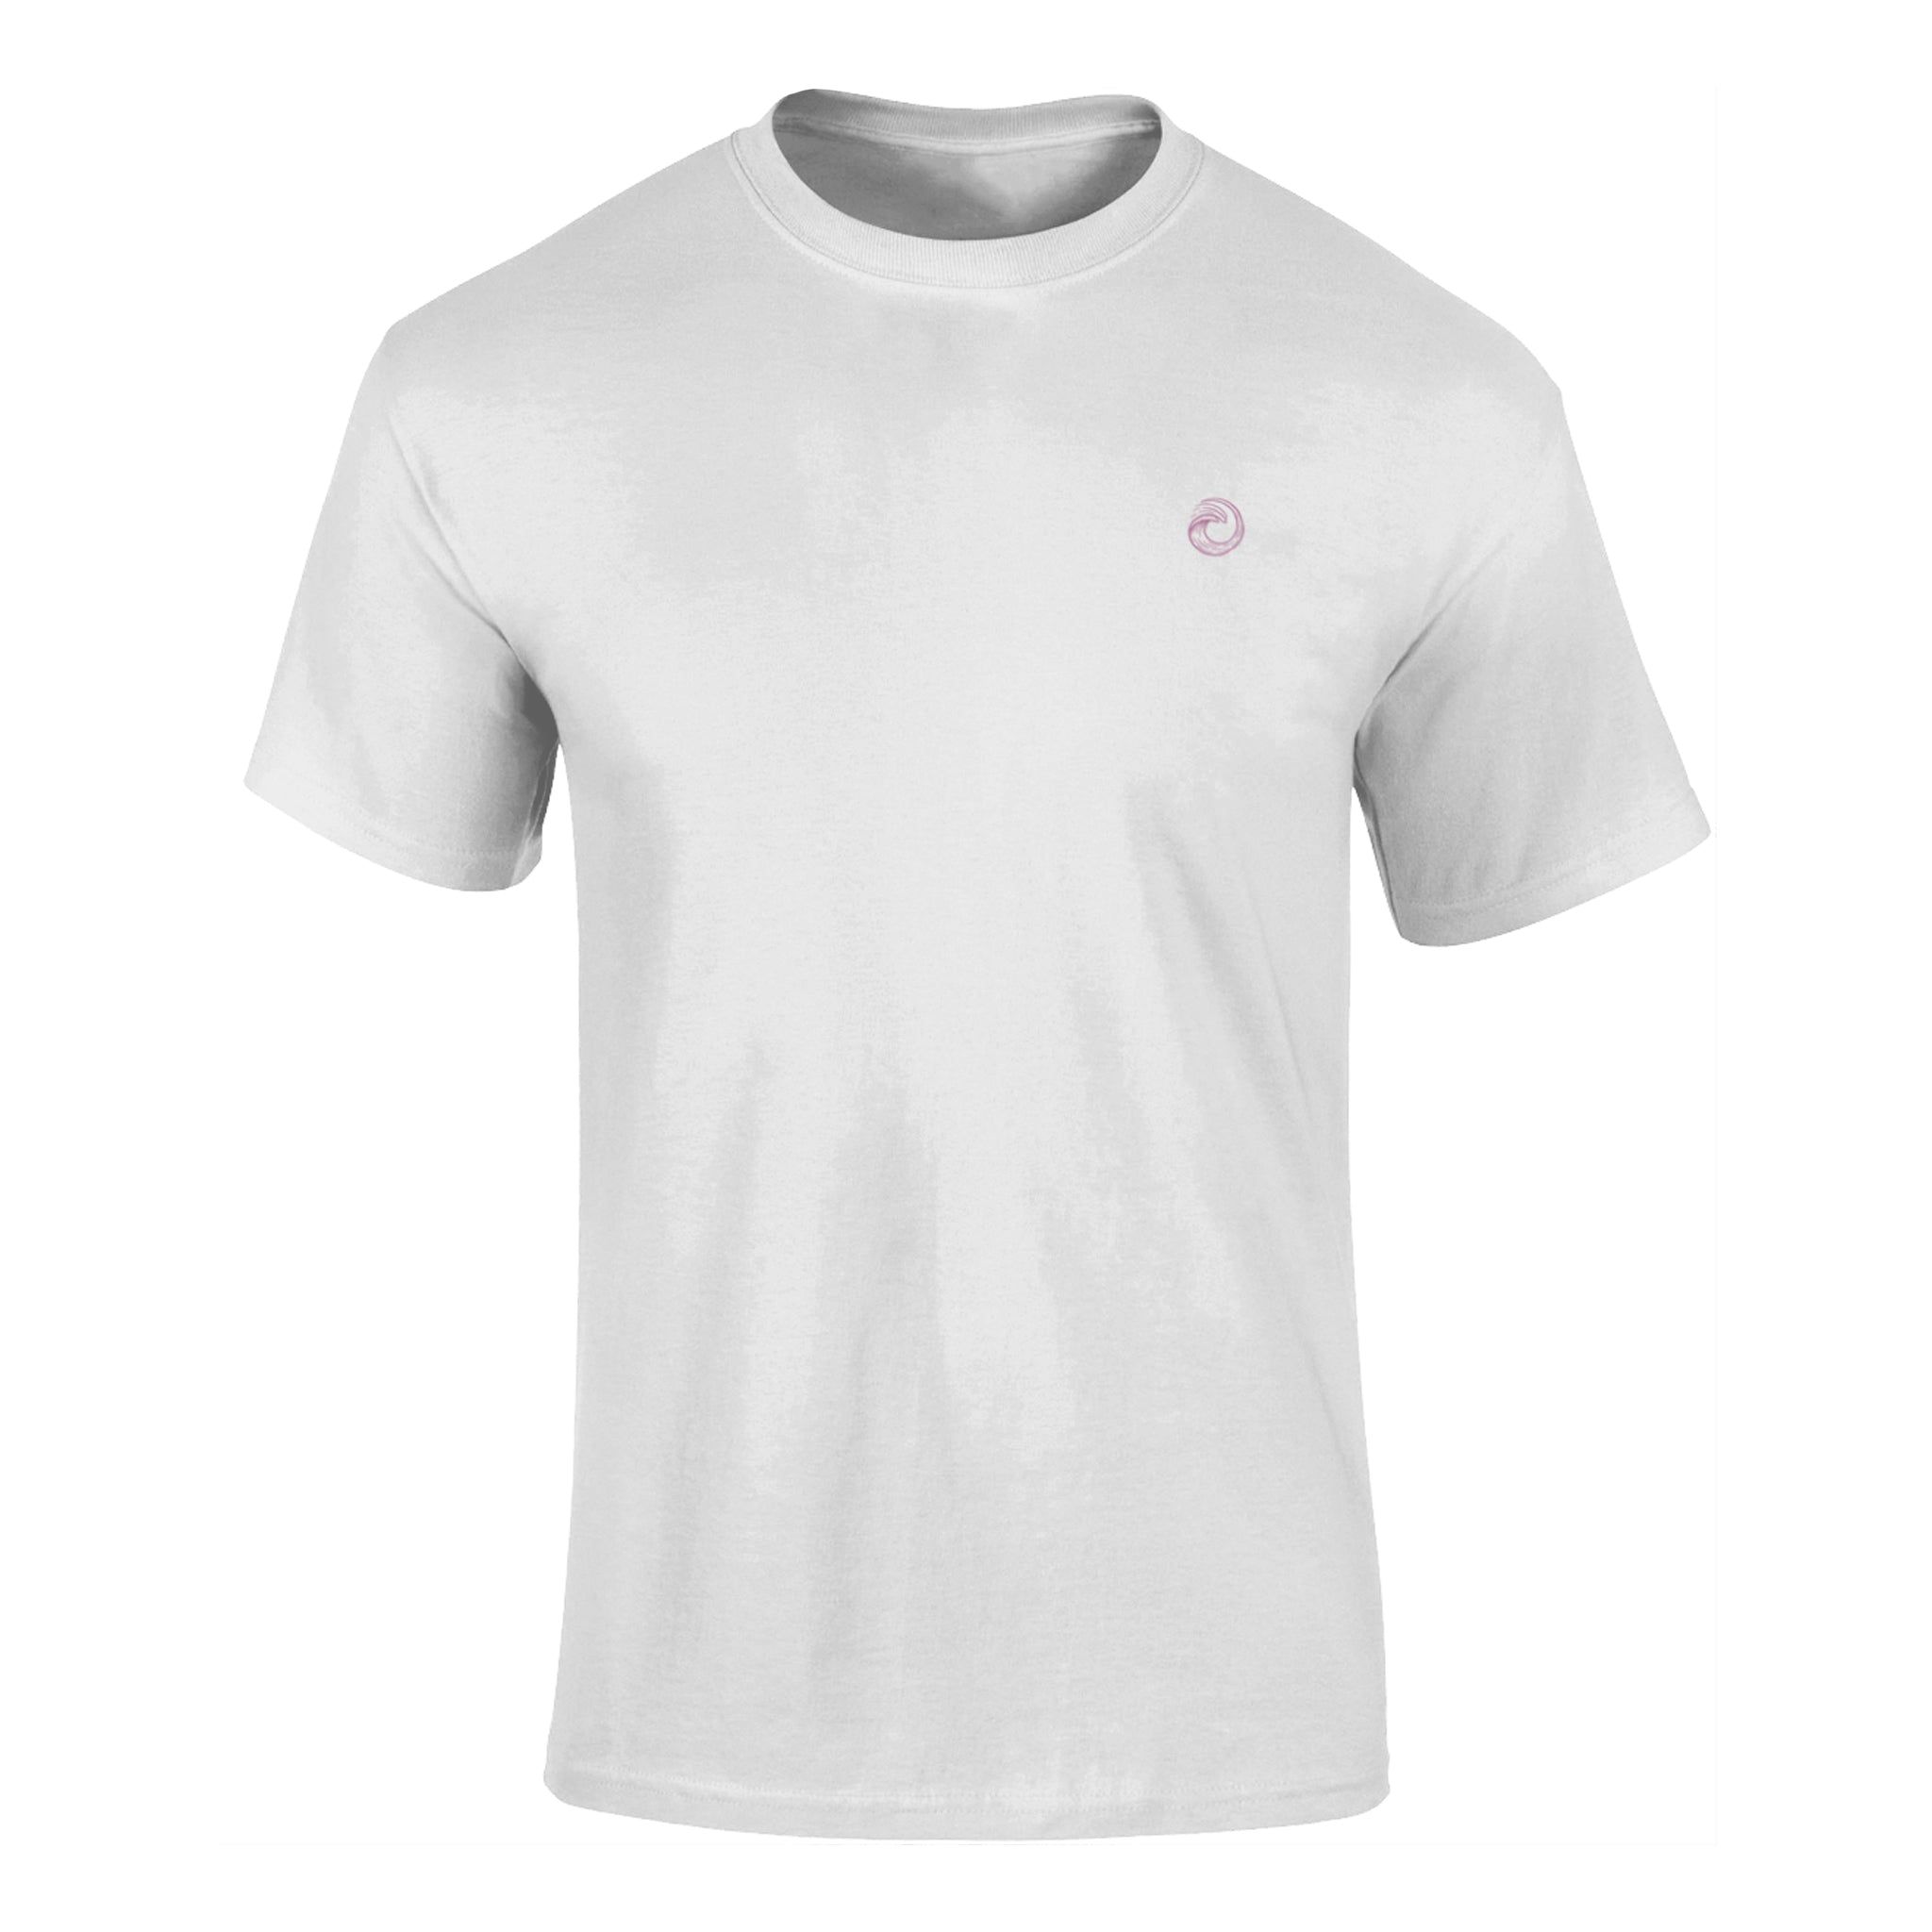 'Paddle' Mens T-Shirts - White Water Edition (Outlet)